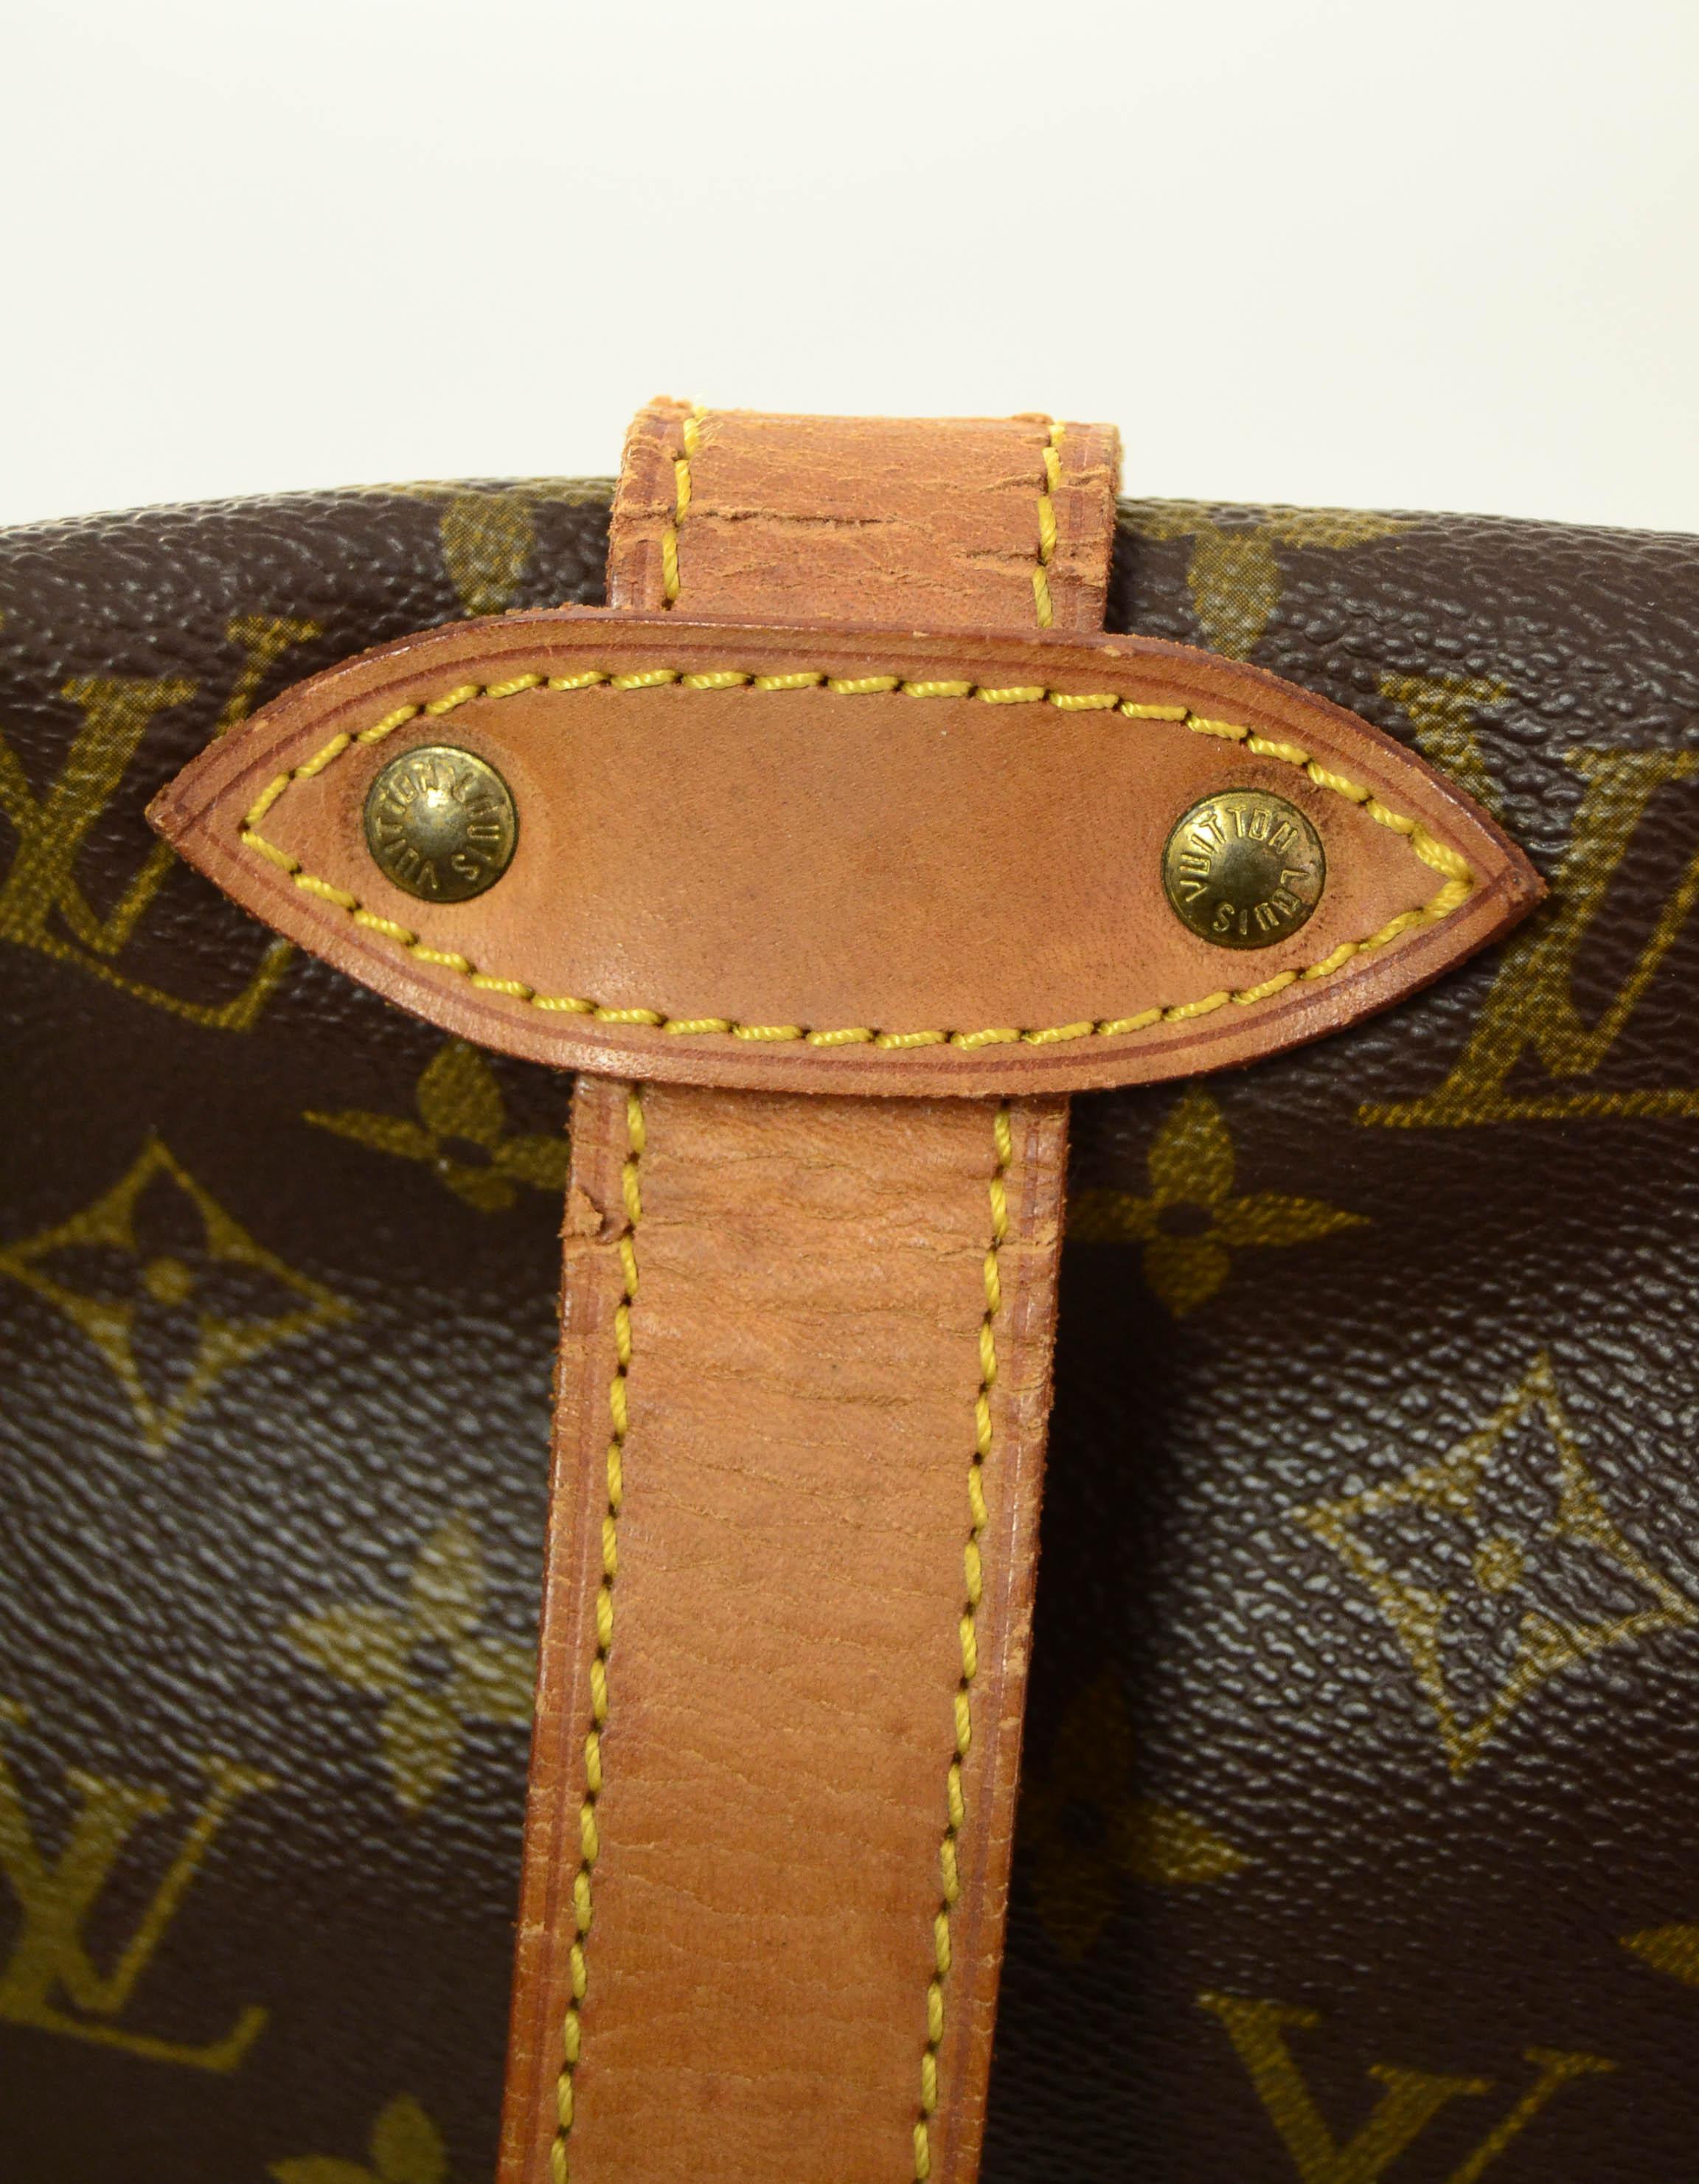 Louis Vuitton Monogram Saumur 35 Double Saddle Bag

Made In: France
Year of Production: 1990
Color: Brown monogram
Hardware: Goldtone
Materials: Coated canvas & vachetta leather
Lining:Canvas
Closure/Opening: Flap with strap
Exterior Pockets: 2